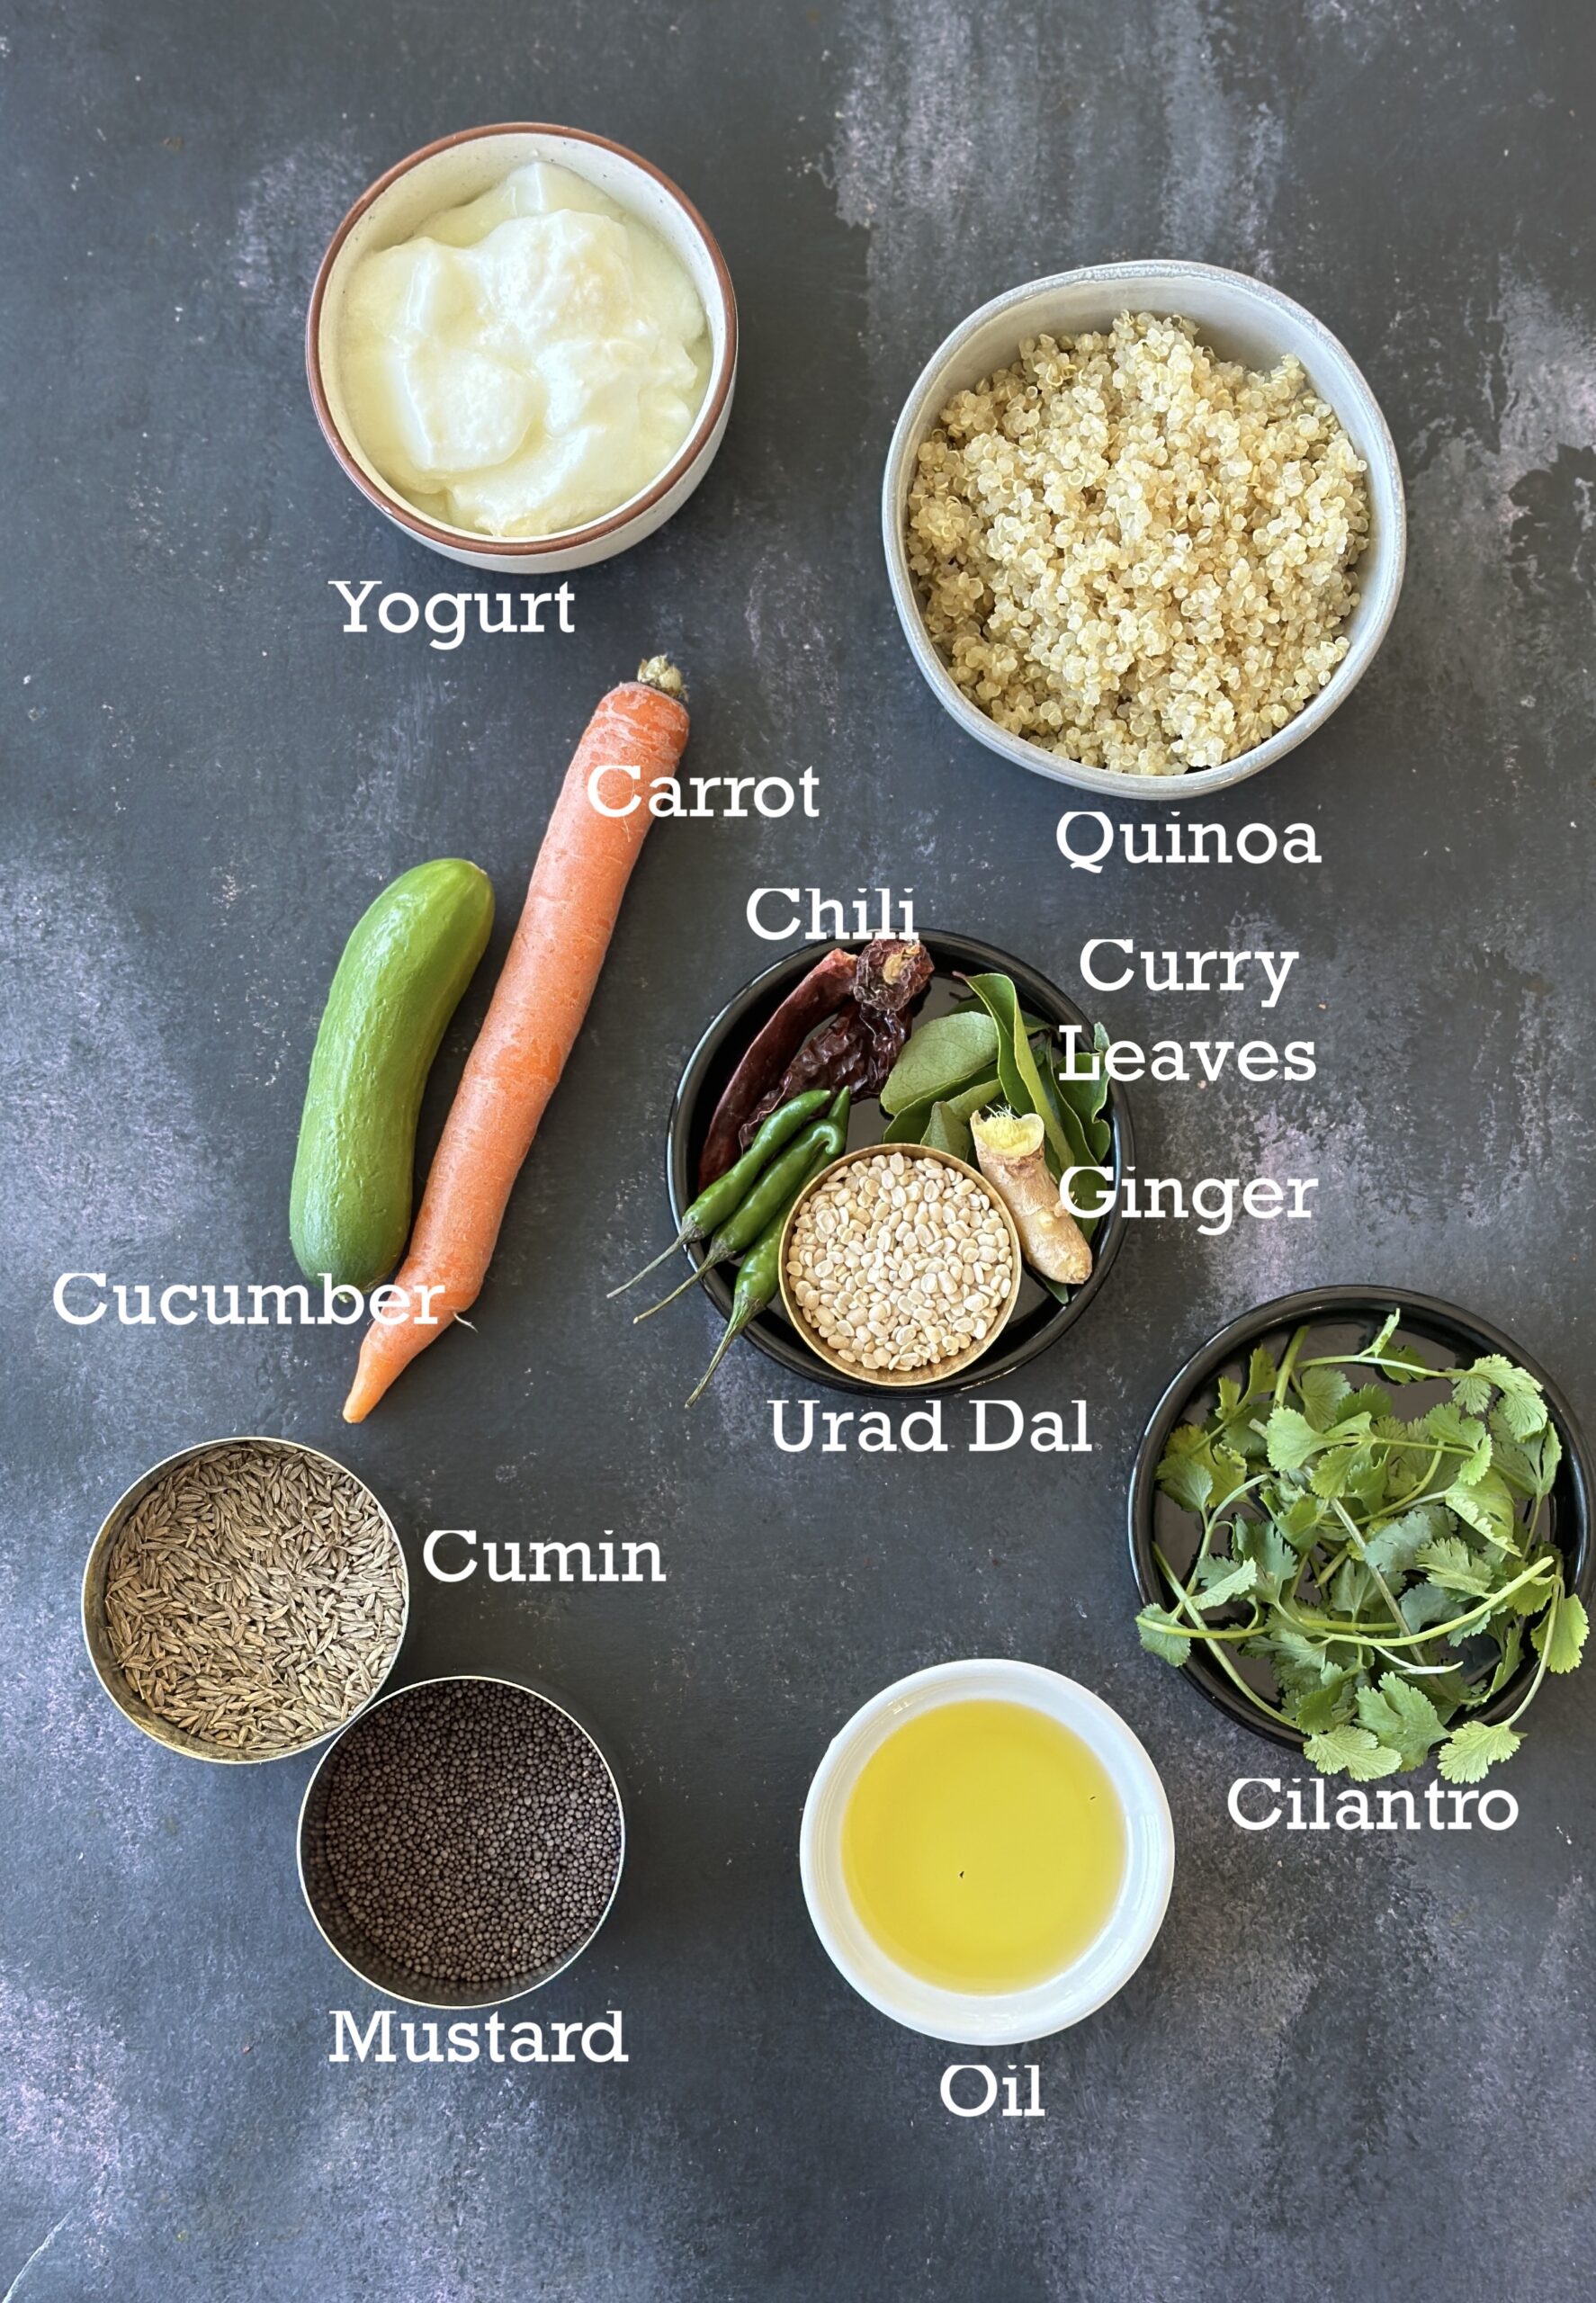 Ingredients for yogurt quinoa; cooked quinoa, yogurt, vegetables and tempering spices in bowls on a black board.